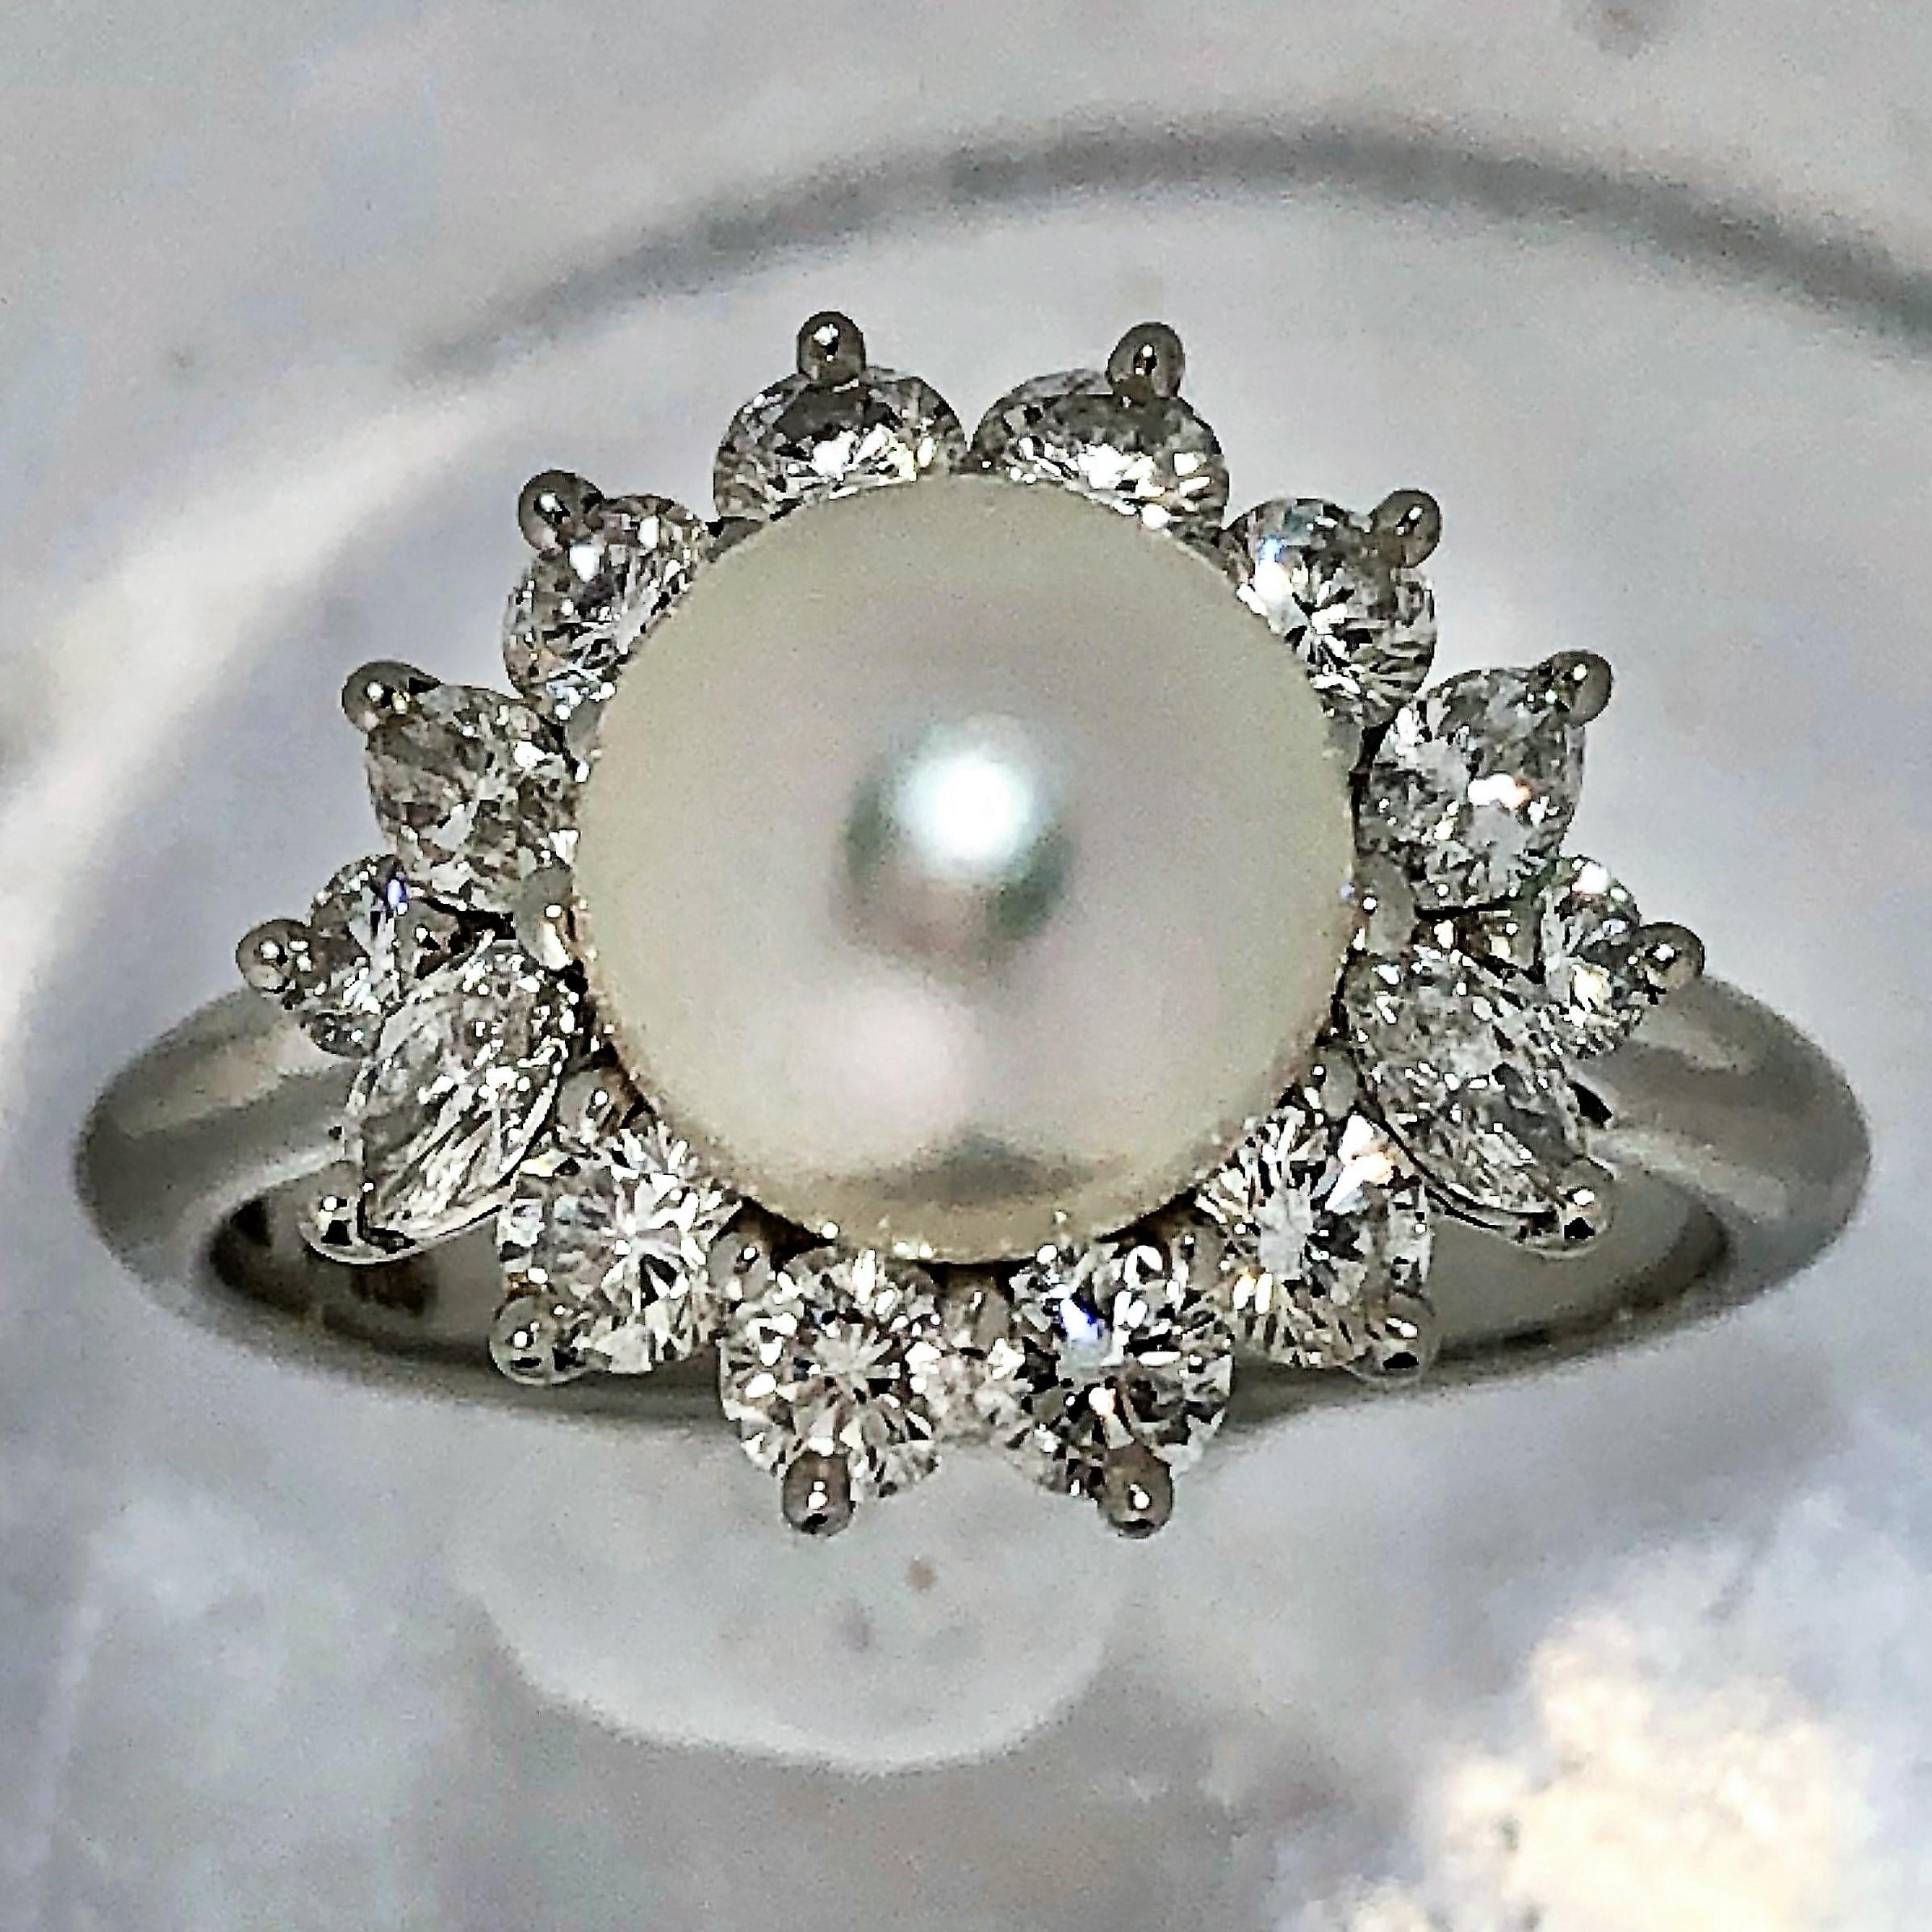 A platinum ring by Tiffany and Company centered around an 7.7 mm pearl in a classically 
inspired ballerina style setting, with 0.85 carats of round brilliant cut and marquise cut 
diamonds of overall F Color and VVS1 Clarity. The pearl is white